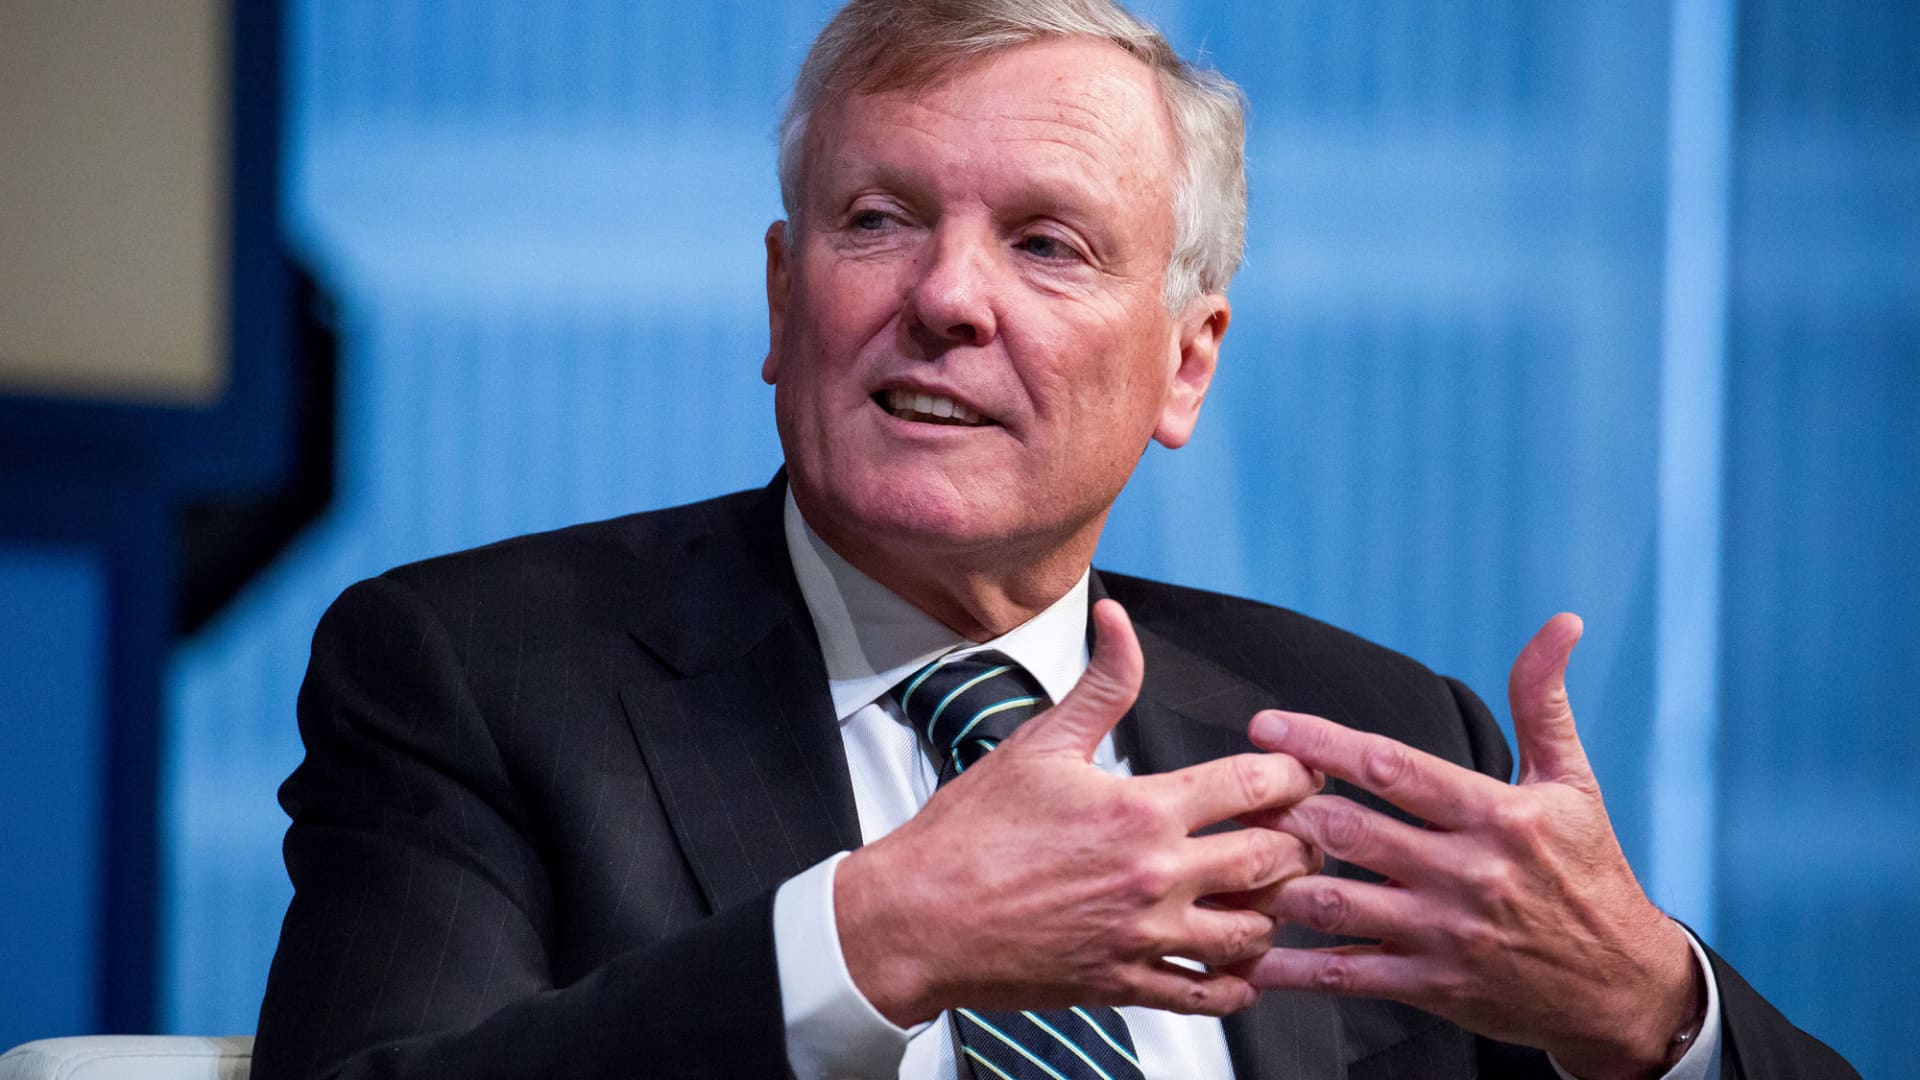 Outgoing Charter CEO Tom Rutledge says in an exclusive CNBC interview that there's 'pain to come' as linear TV gives way to streaming